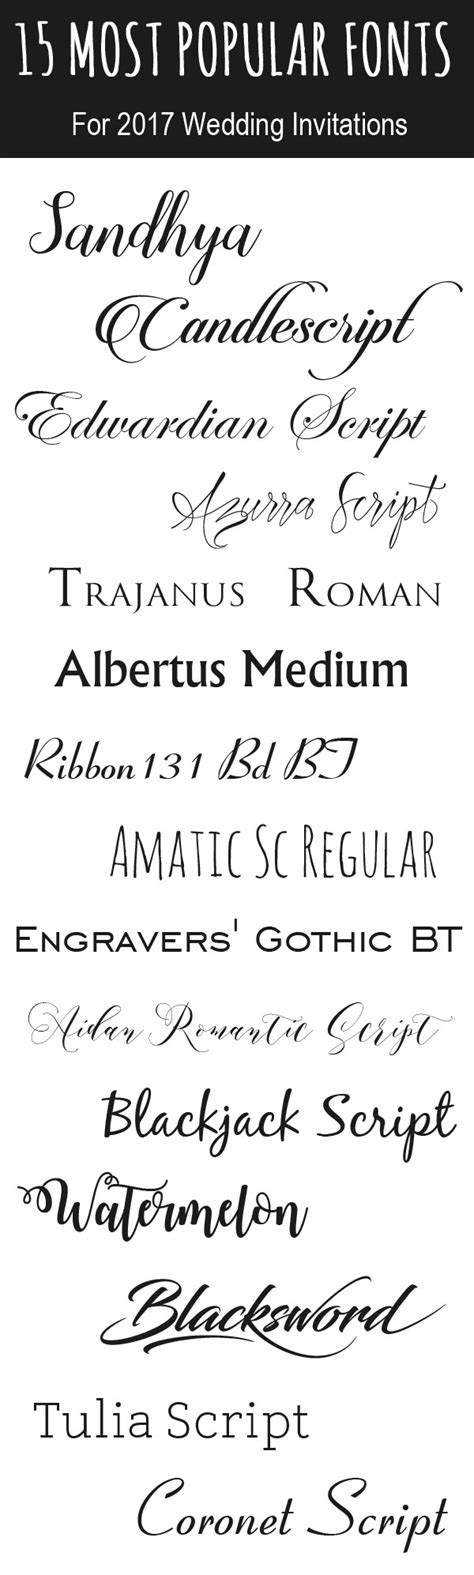 Best Free Wedding Fonts For Invitations